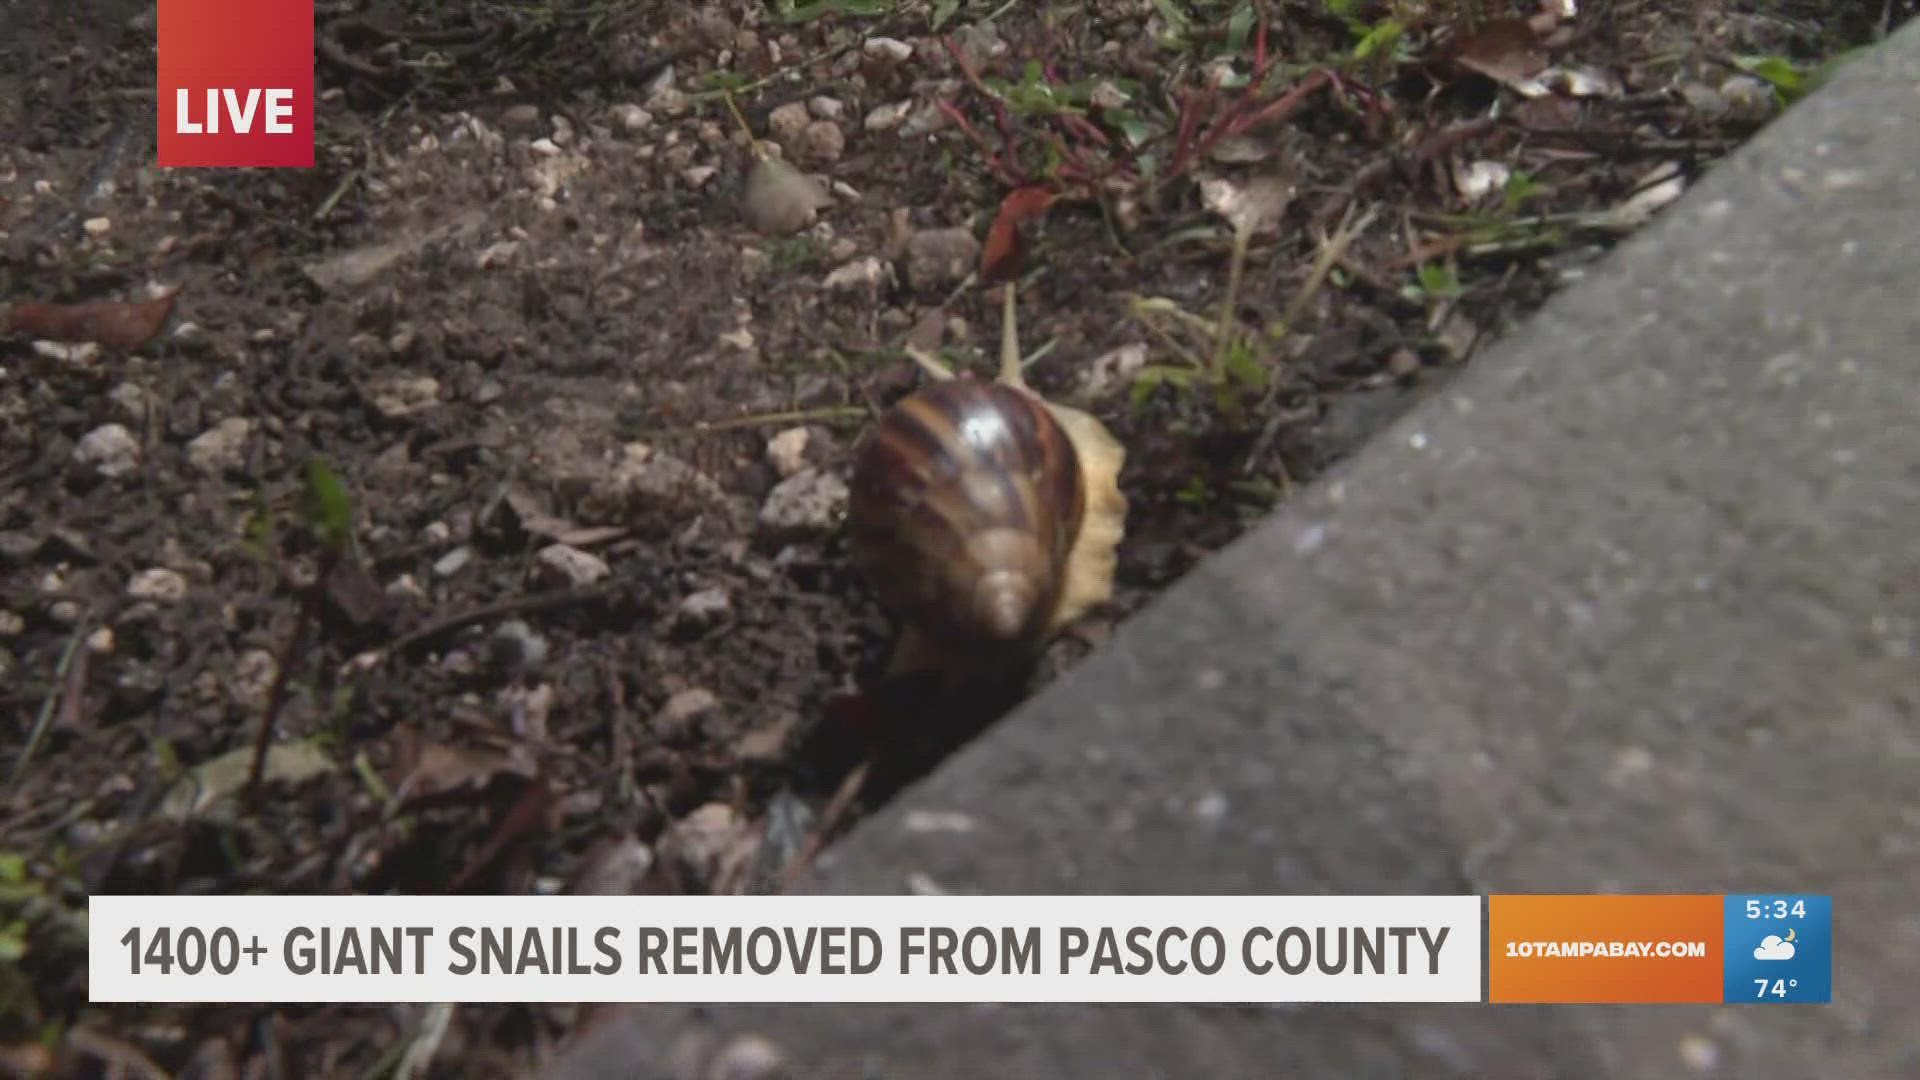 Giant African land snails can destroy plants and property and even spread illness.